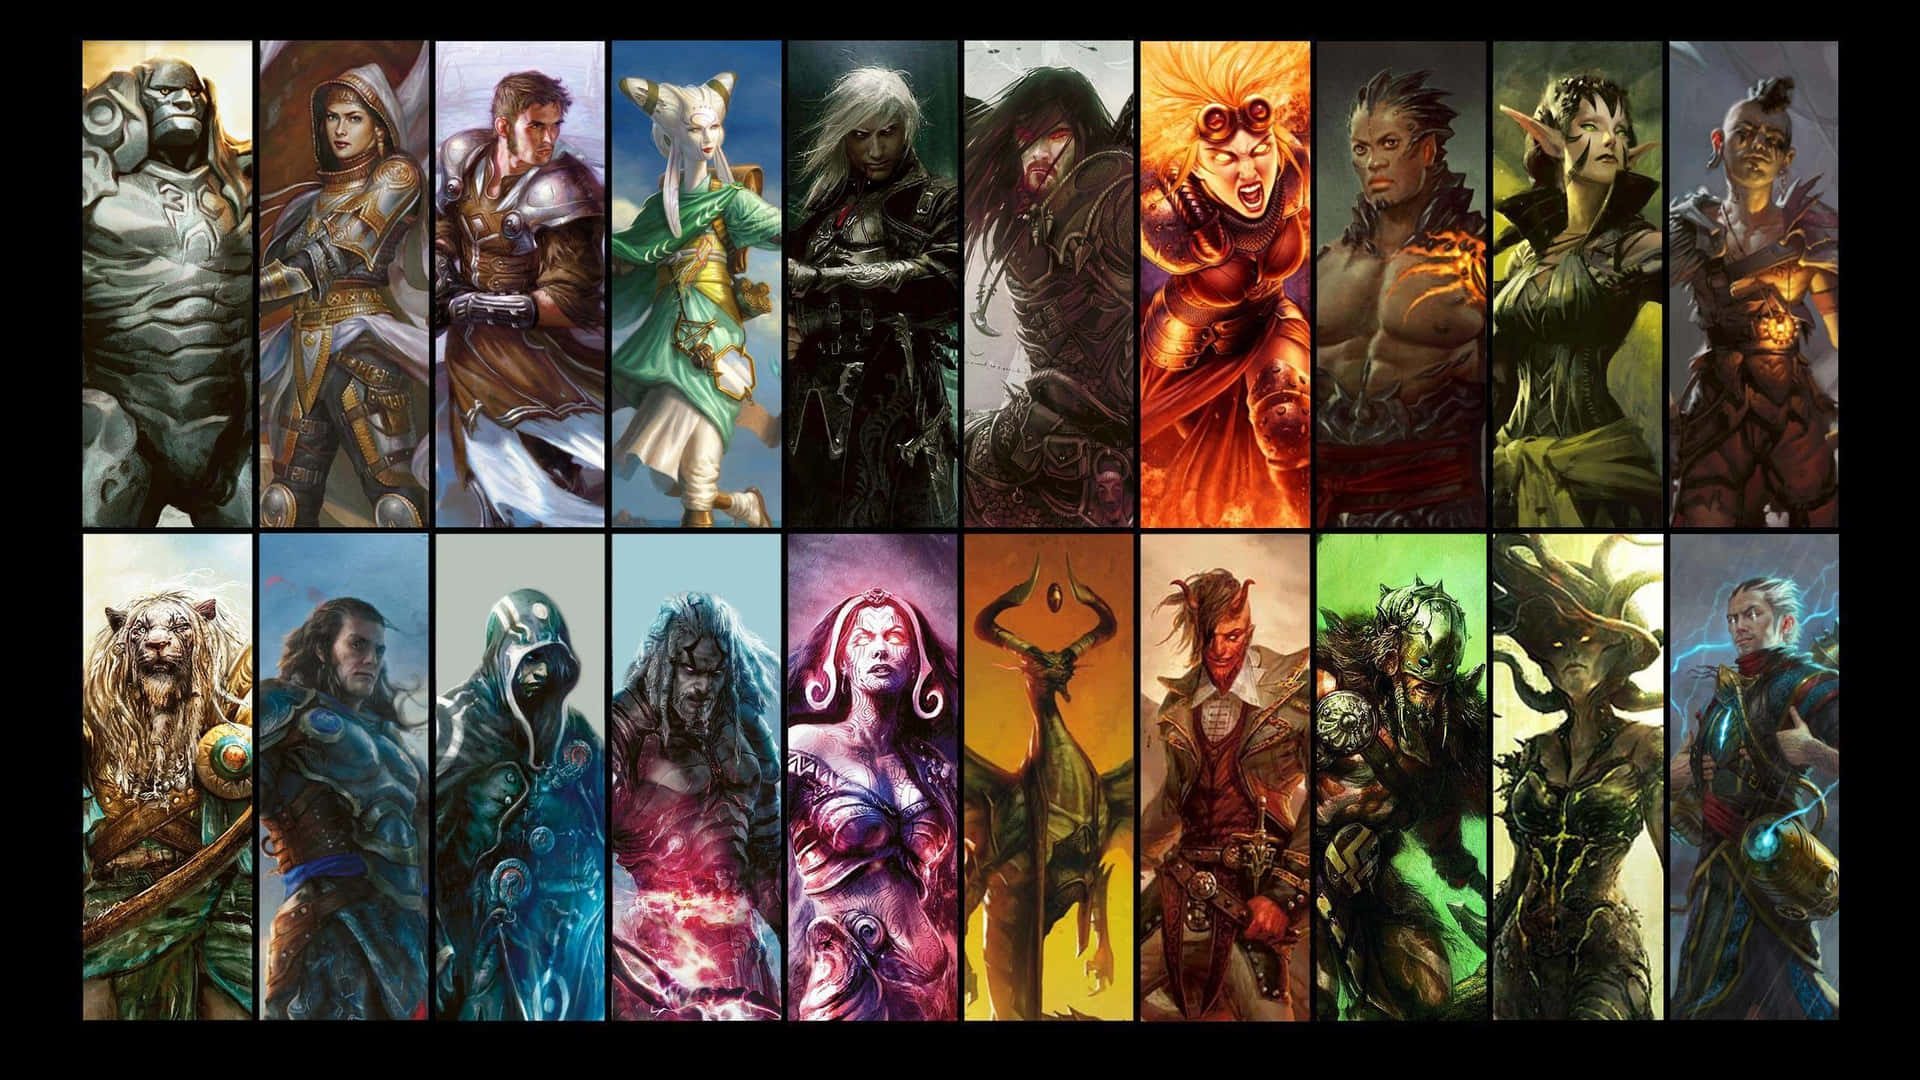 Join Magic: The Gathering's exciting world of adventure.